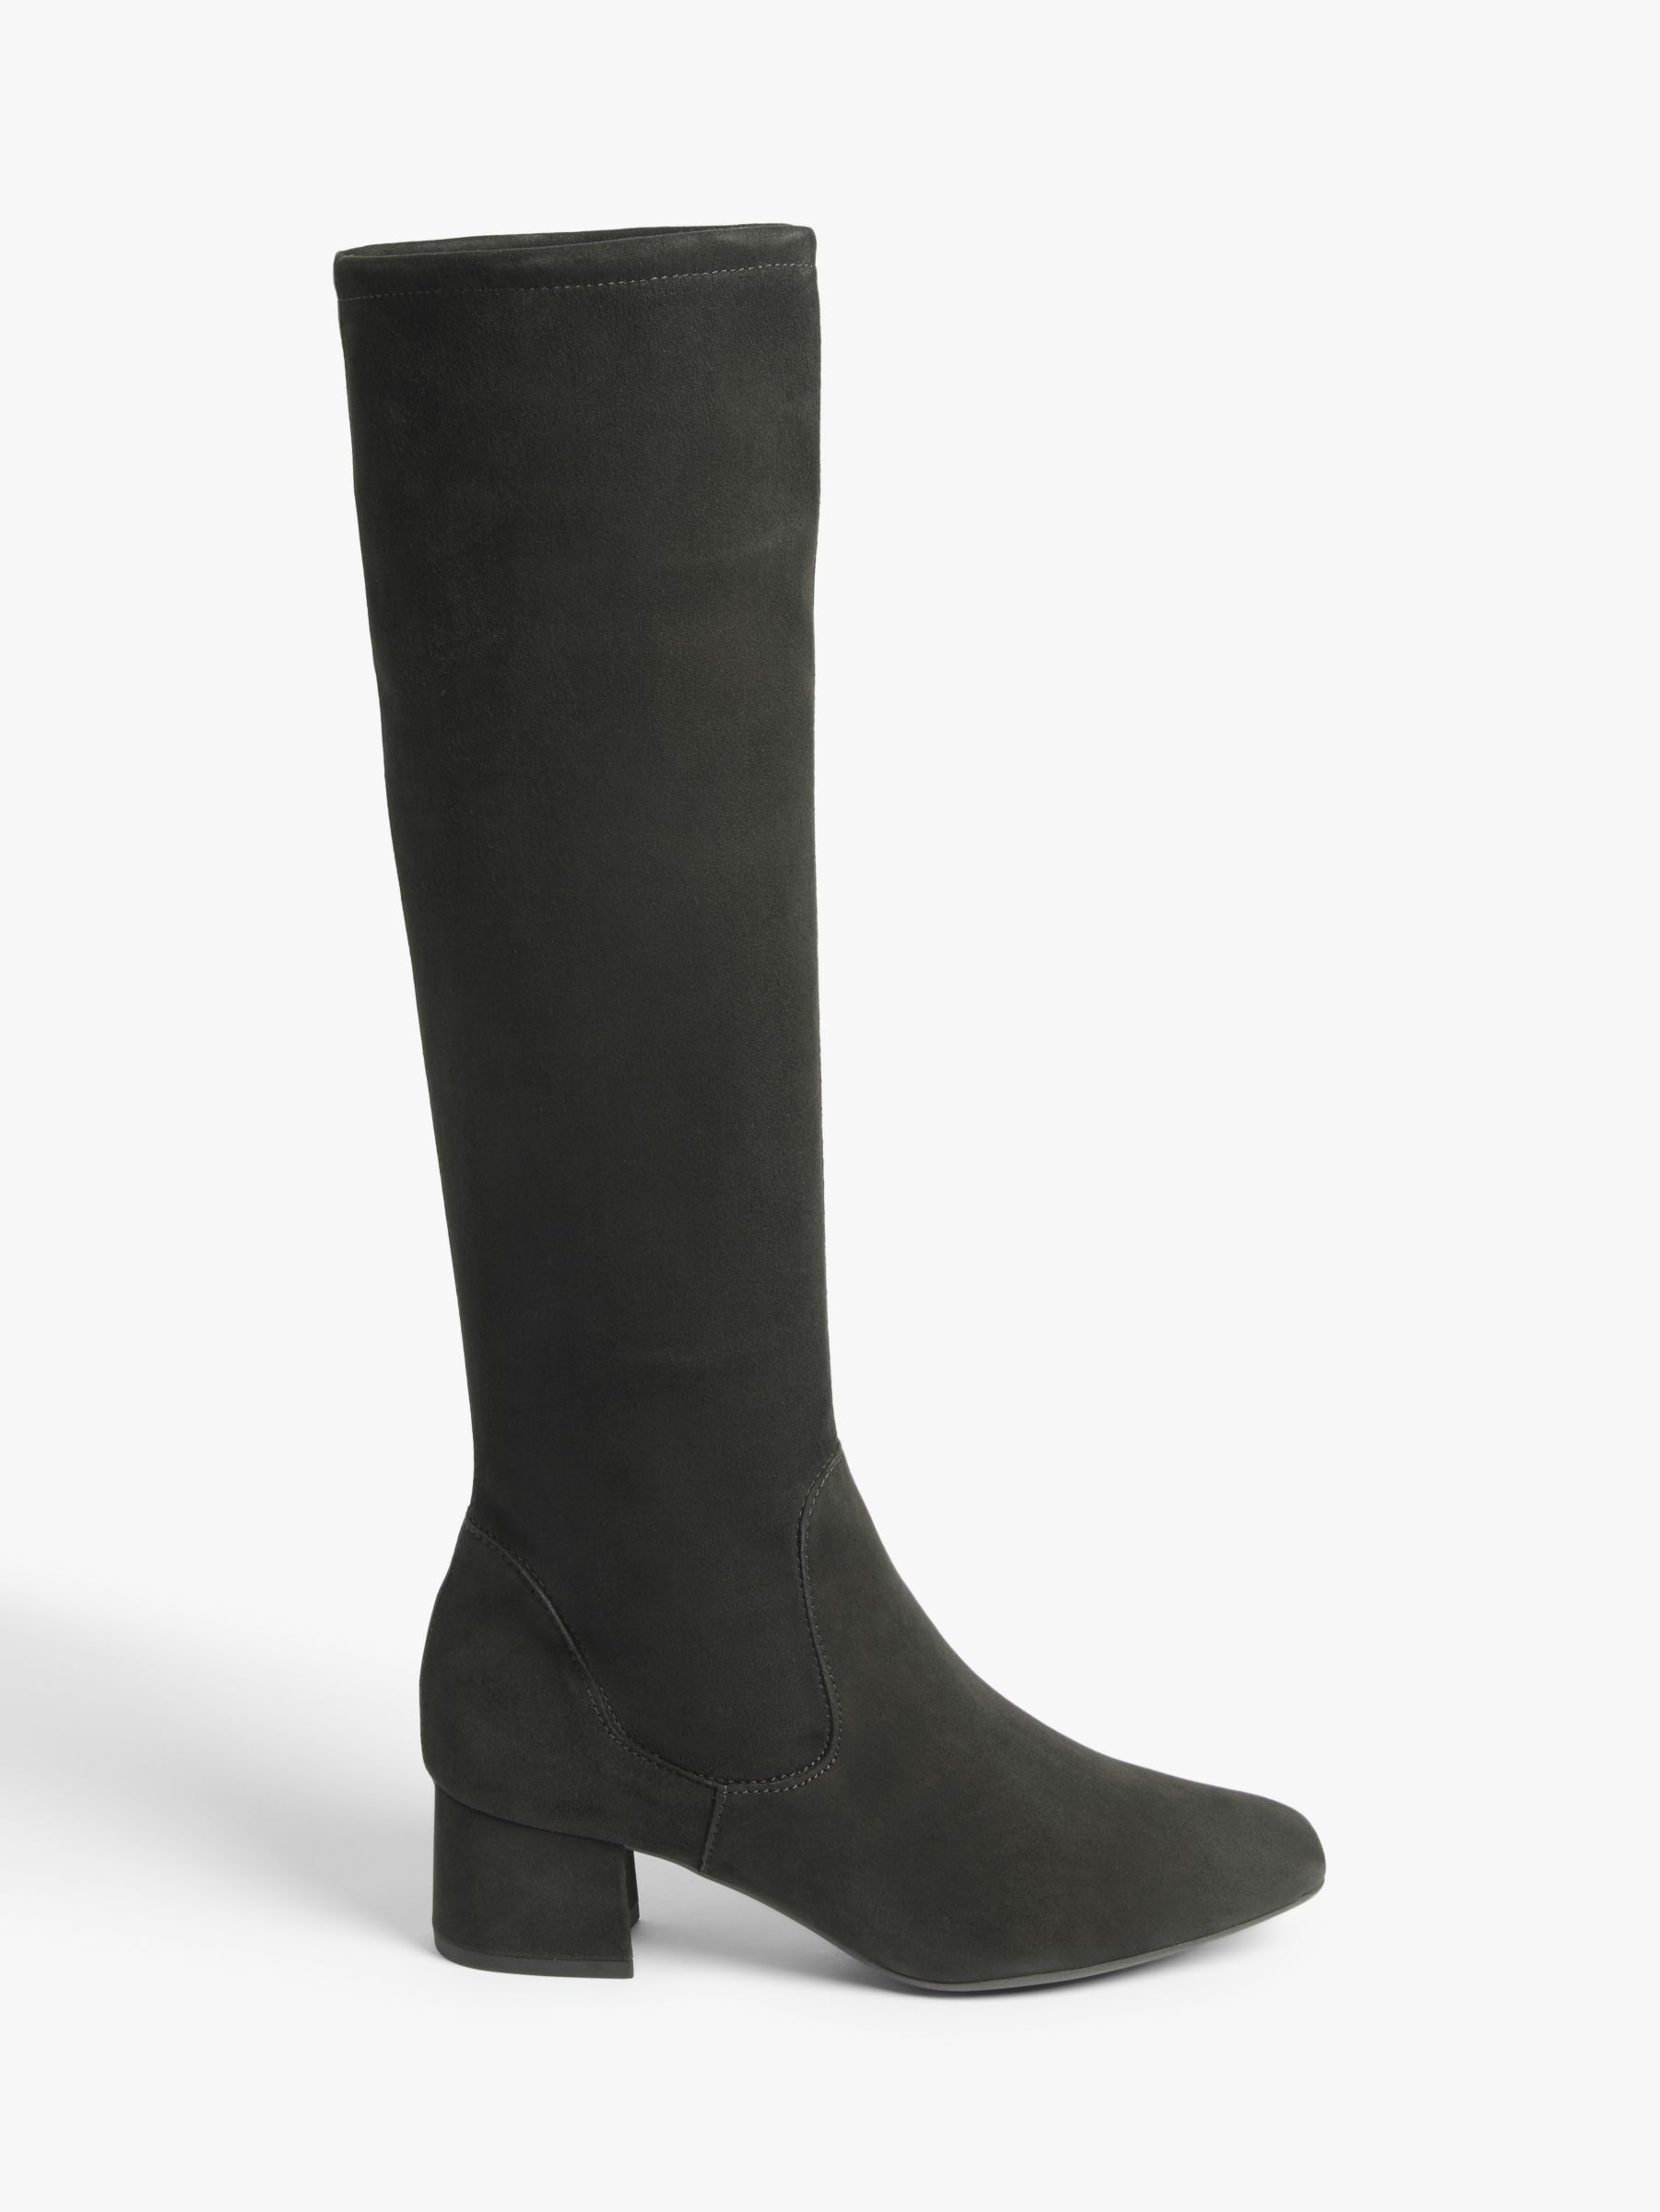 Peter Kaiser Tomke Suede Knee High Boots